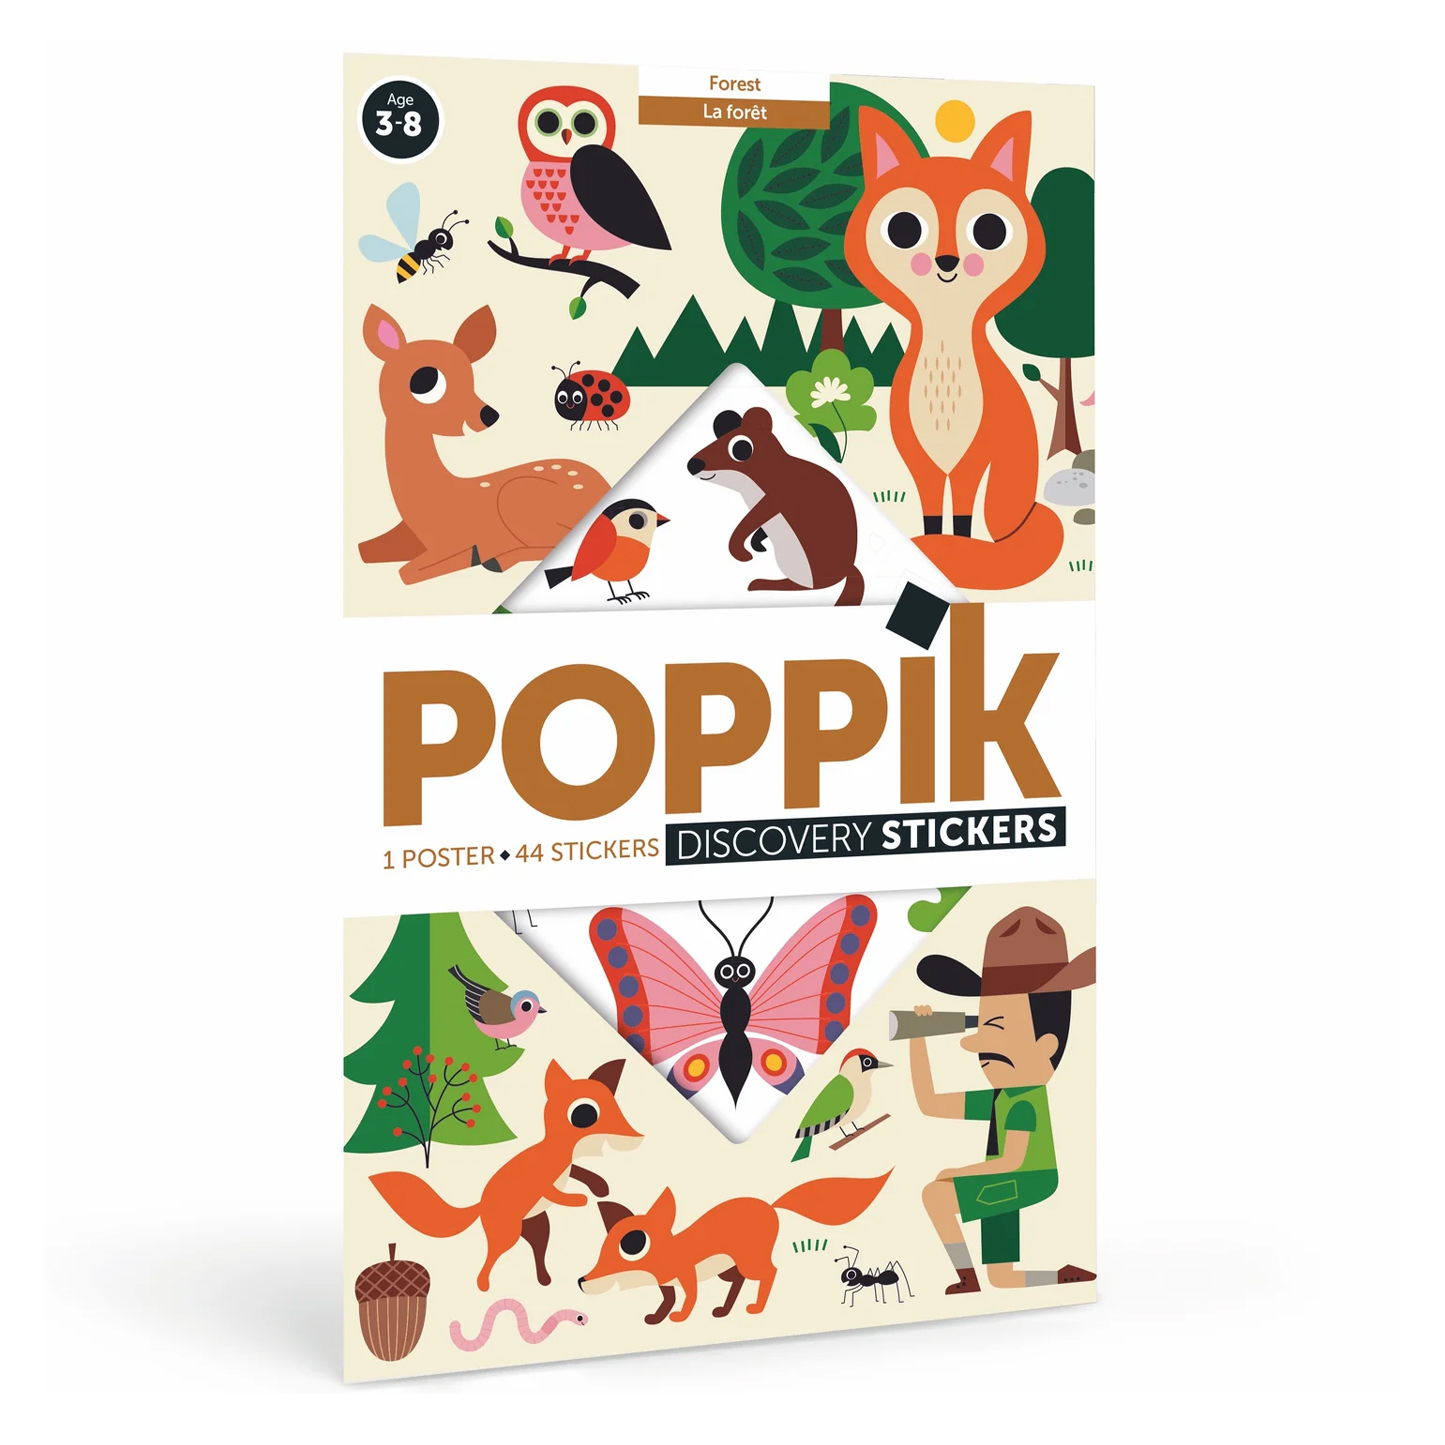  Poppik Discovery Sticker Poster - Forest